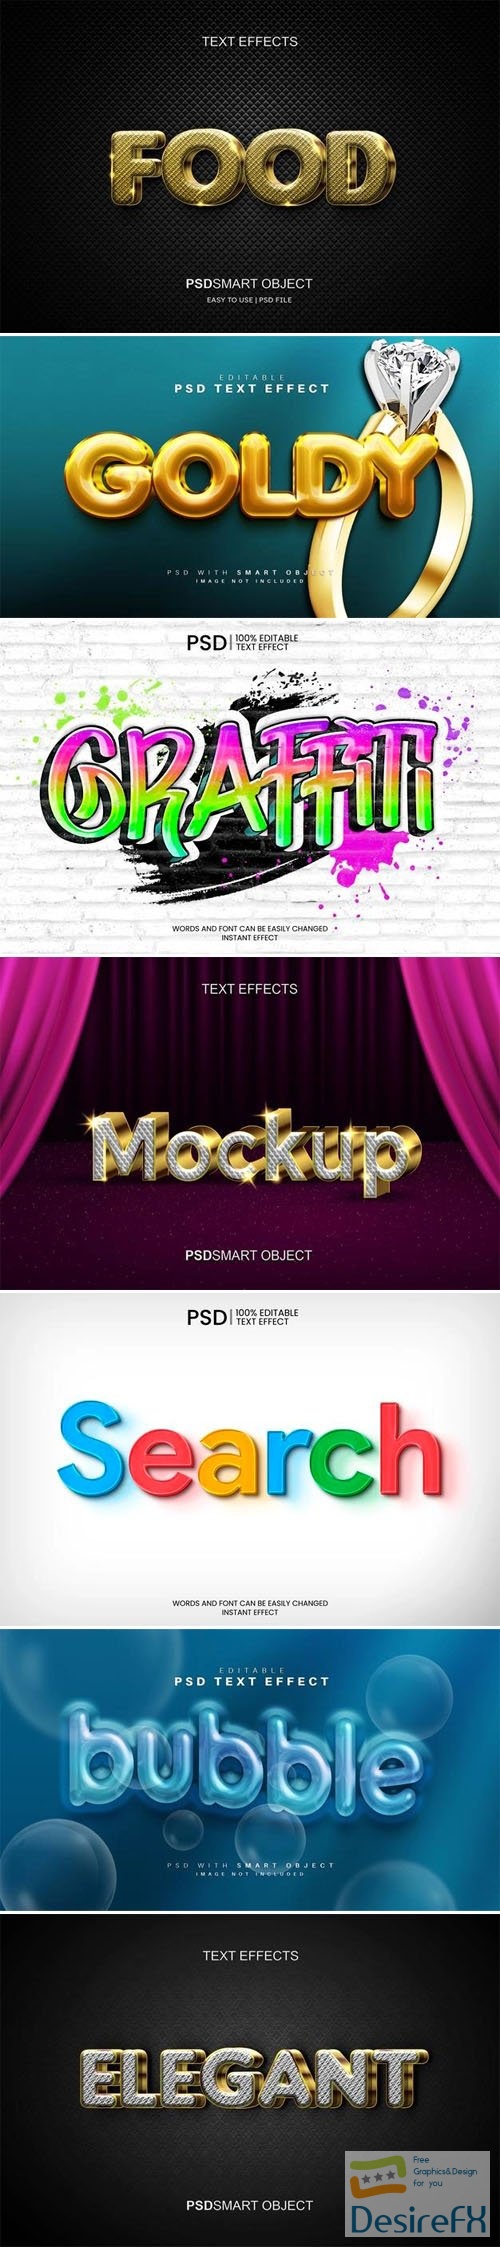 14 New Text Effects PSD Templates Collection